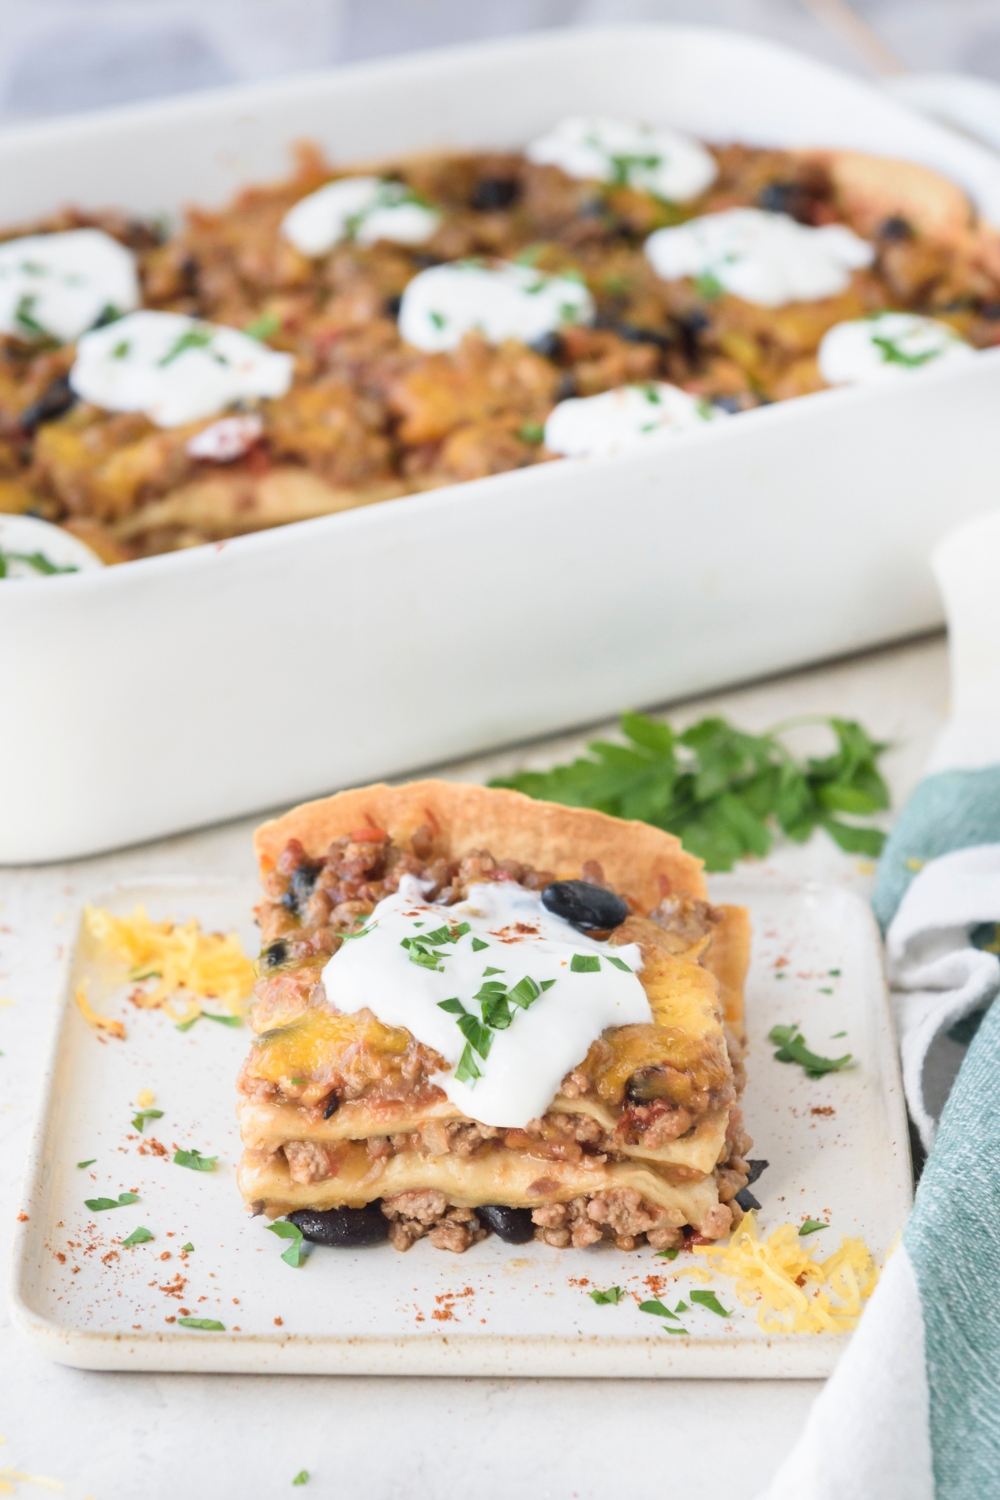 A slice of Mexican lasagna with ground meat and black peppers layered between tortillas and sour cream on top. In the background is a baking dish filled with more lasagna.